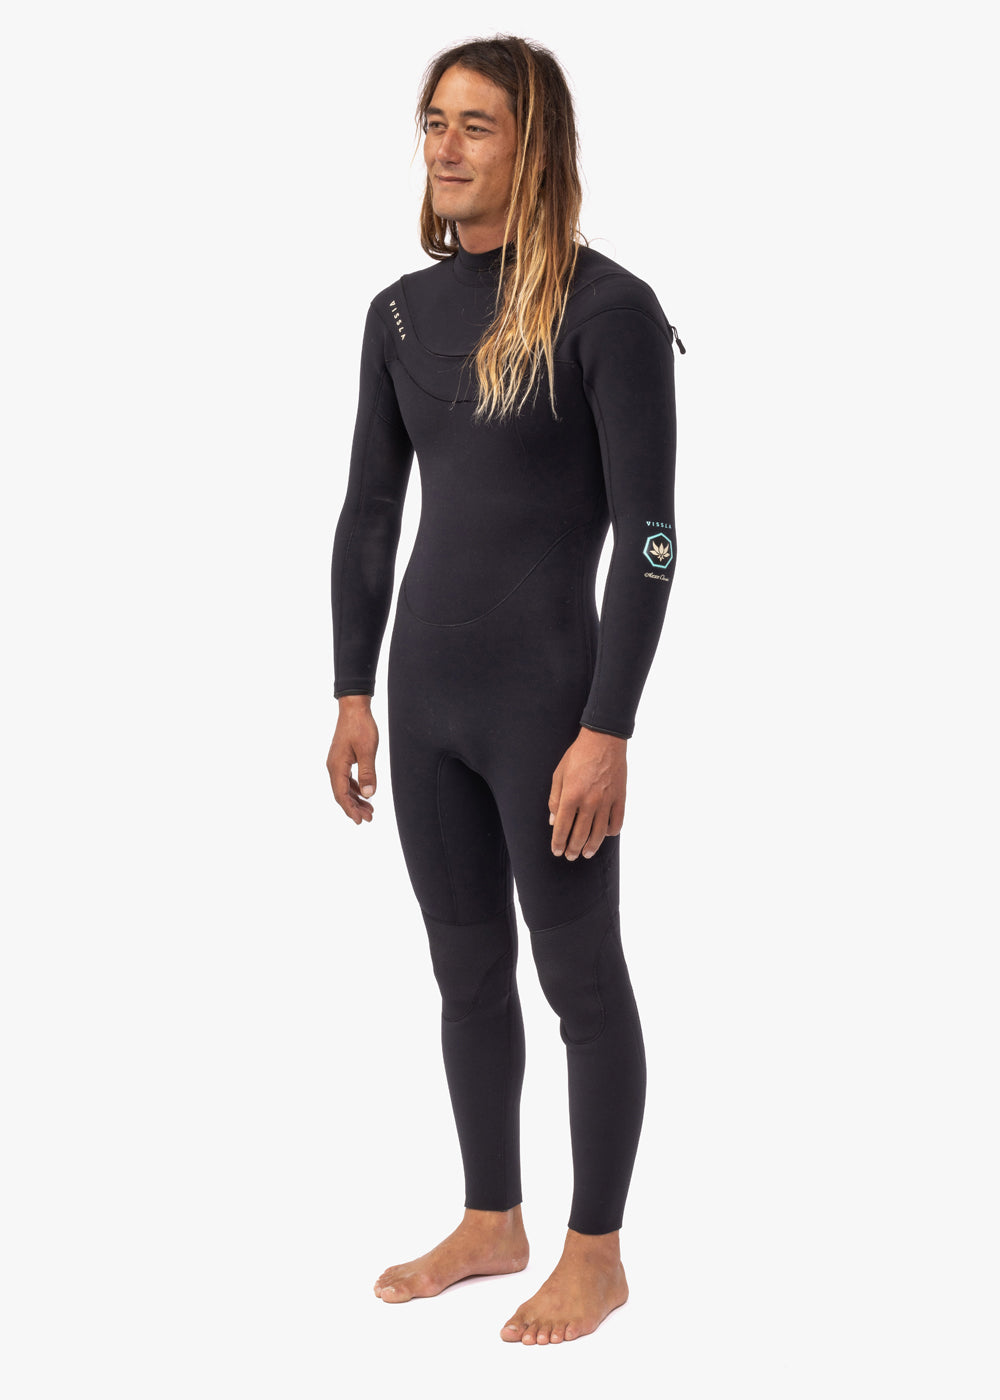 Vasca Wetsuits all3ミリ